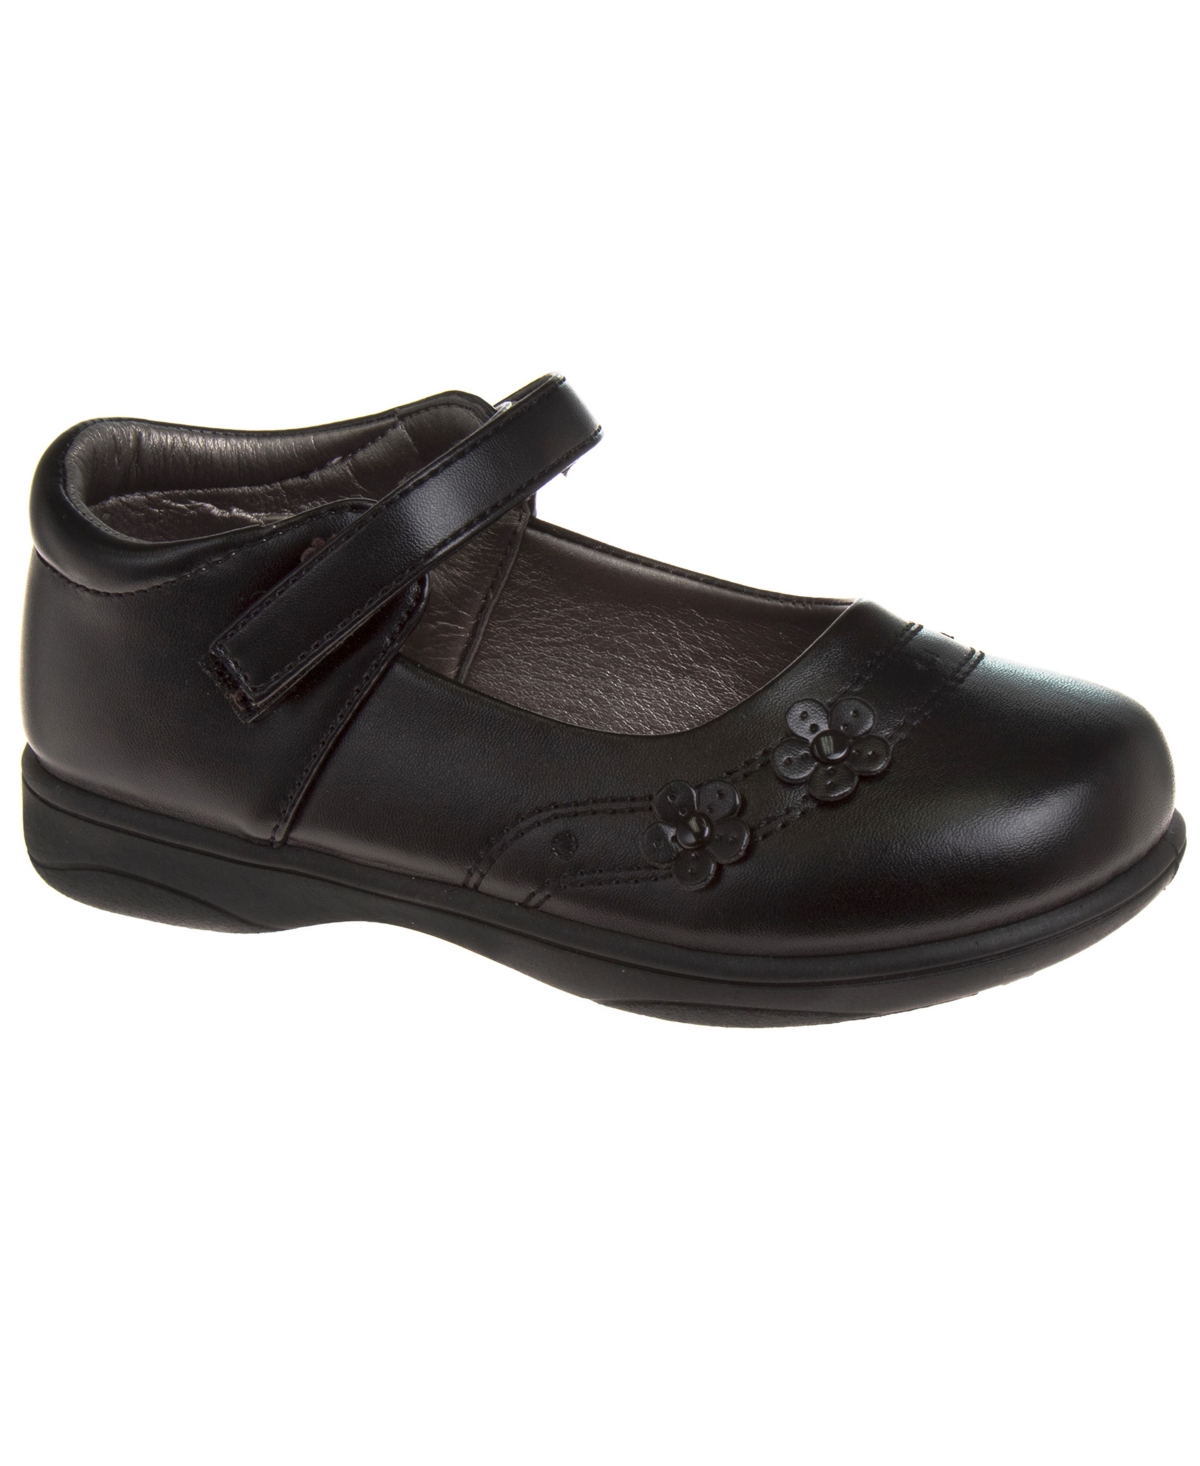 French Toast Kids' Little Girls School Hook And Loop Closure Shoes In Black